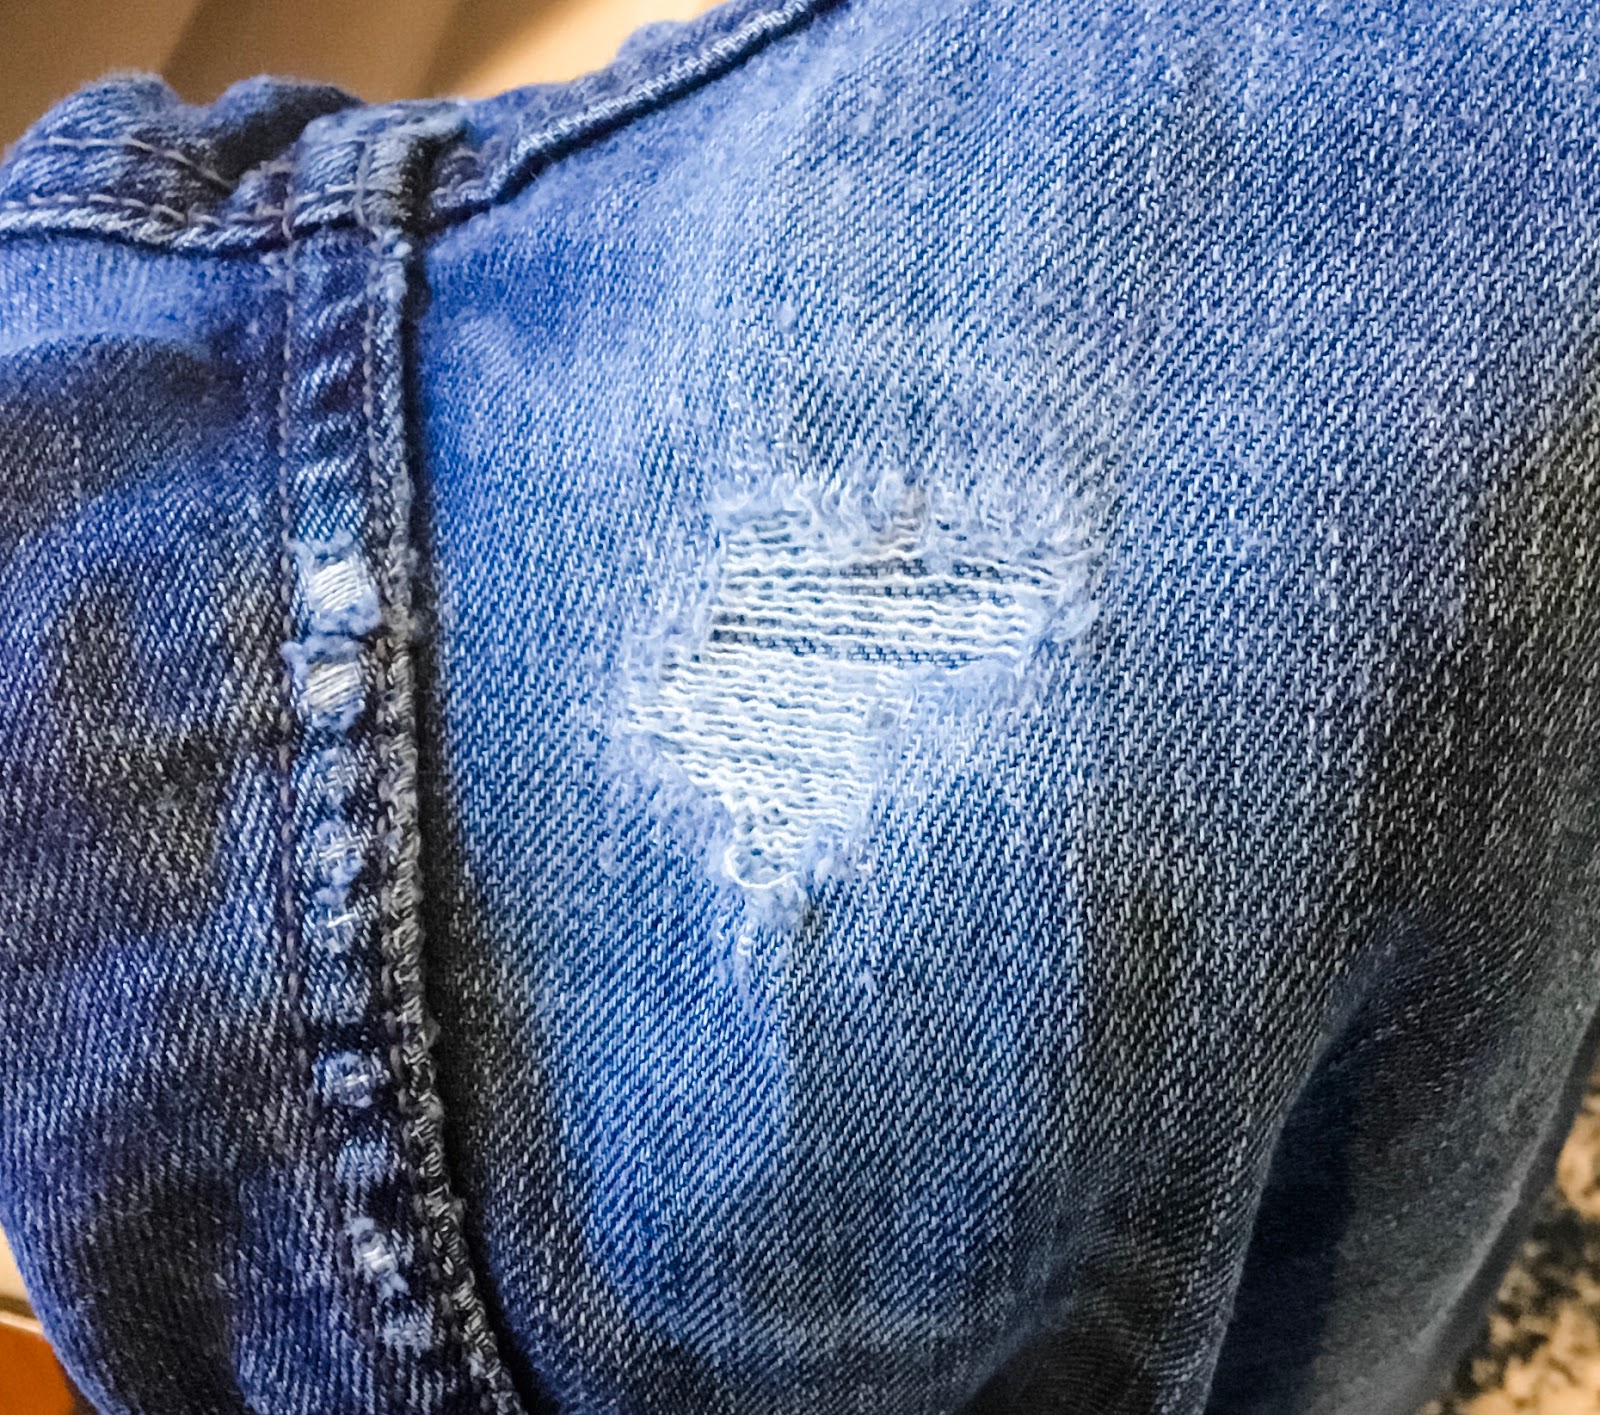 Repairing Beloved Jeans | No Rules after 50